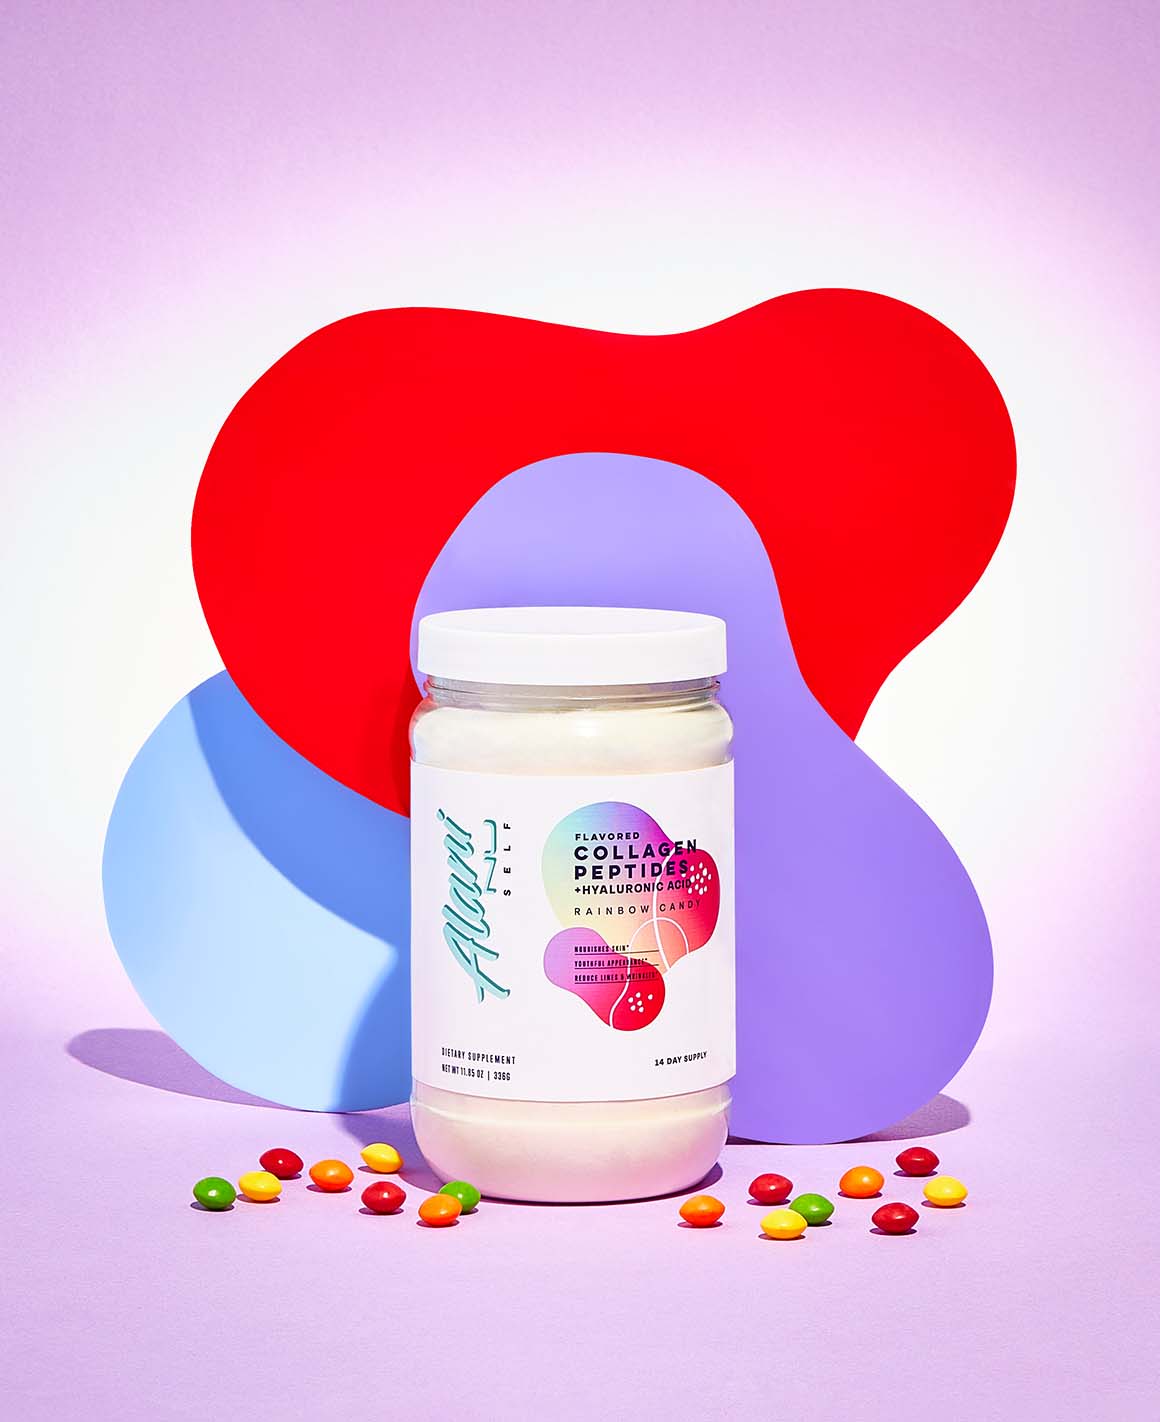 A container of Collagen Peptides in Rainbow Candy flavor sitting next to a pile of candy.